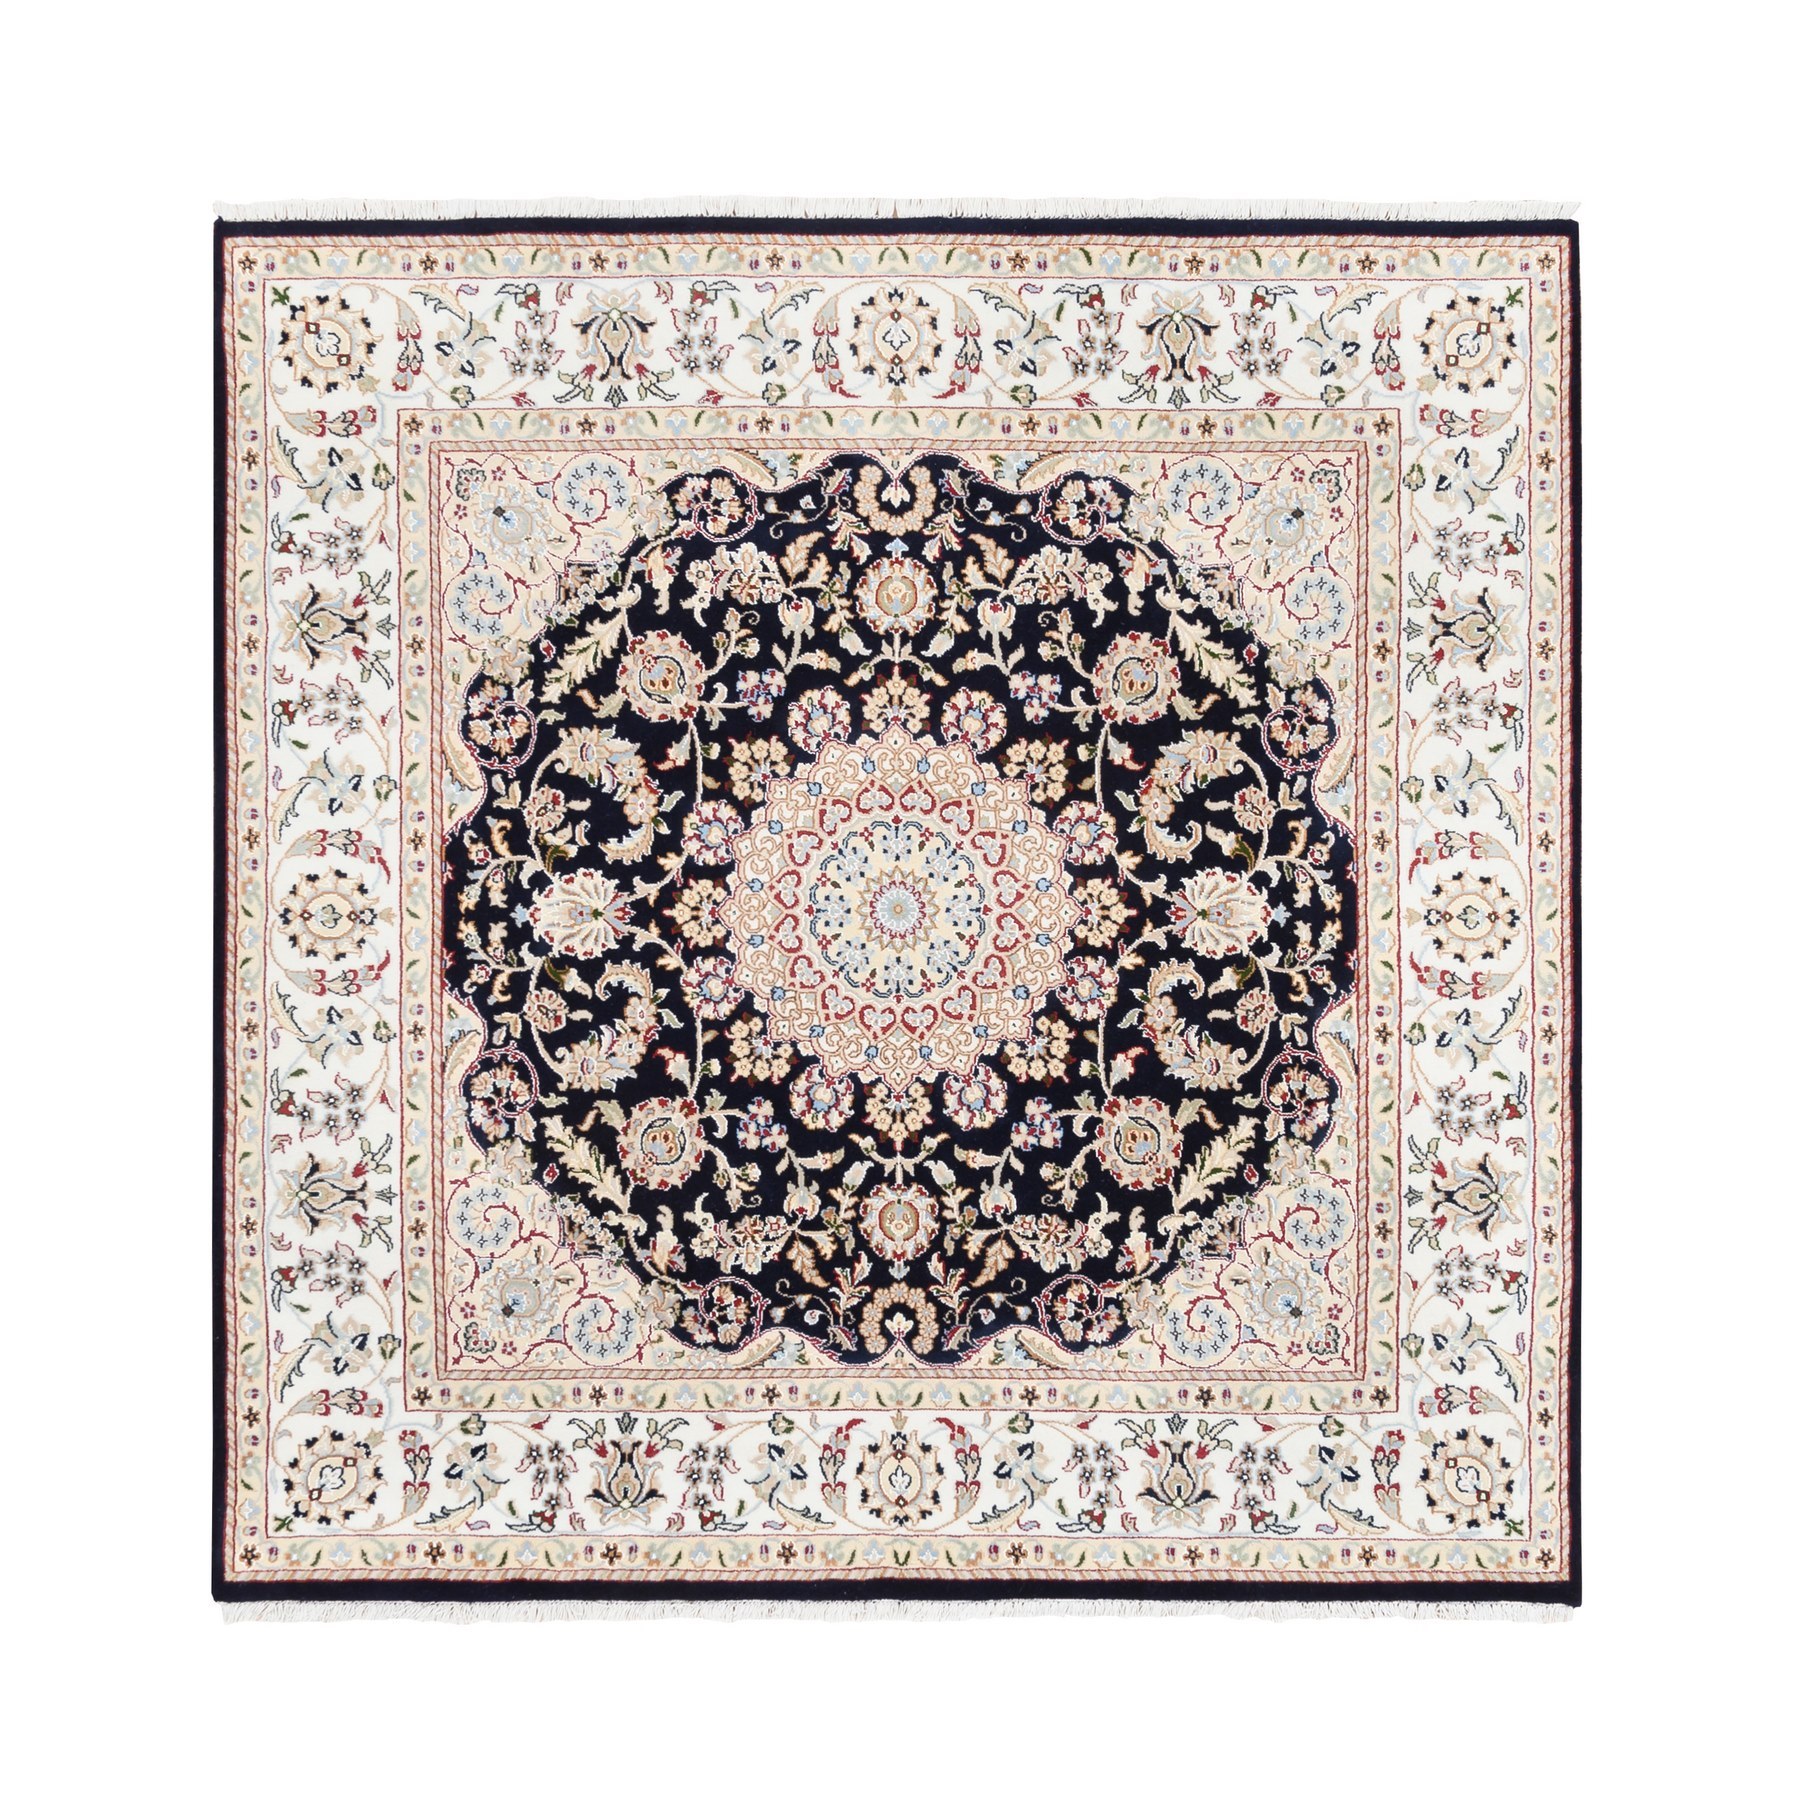 Pirniakan Collection Hand Knotted Blue Rug No: 1125518